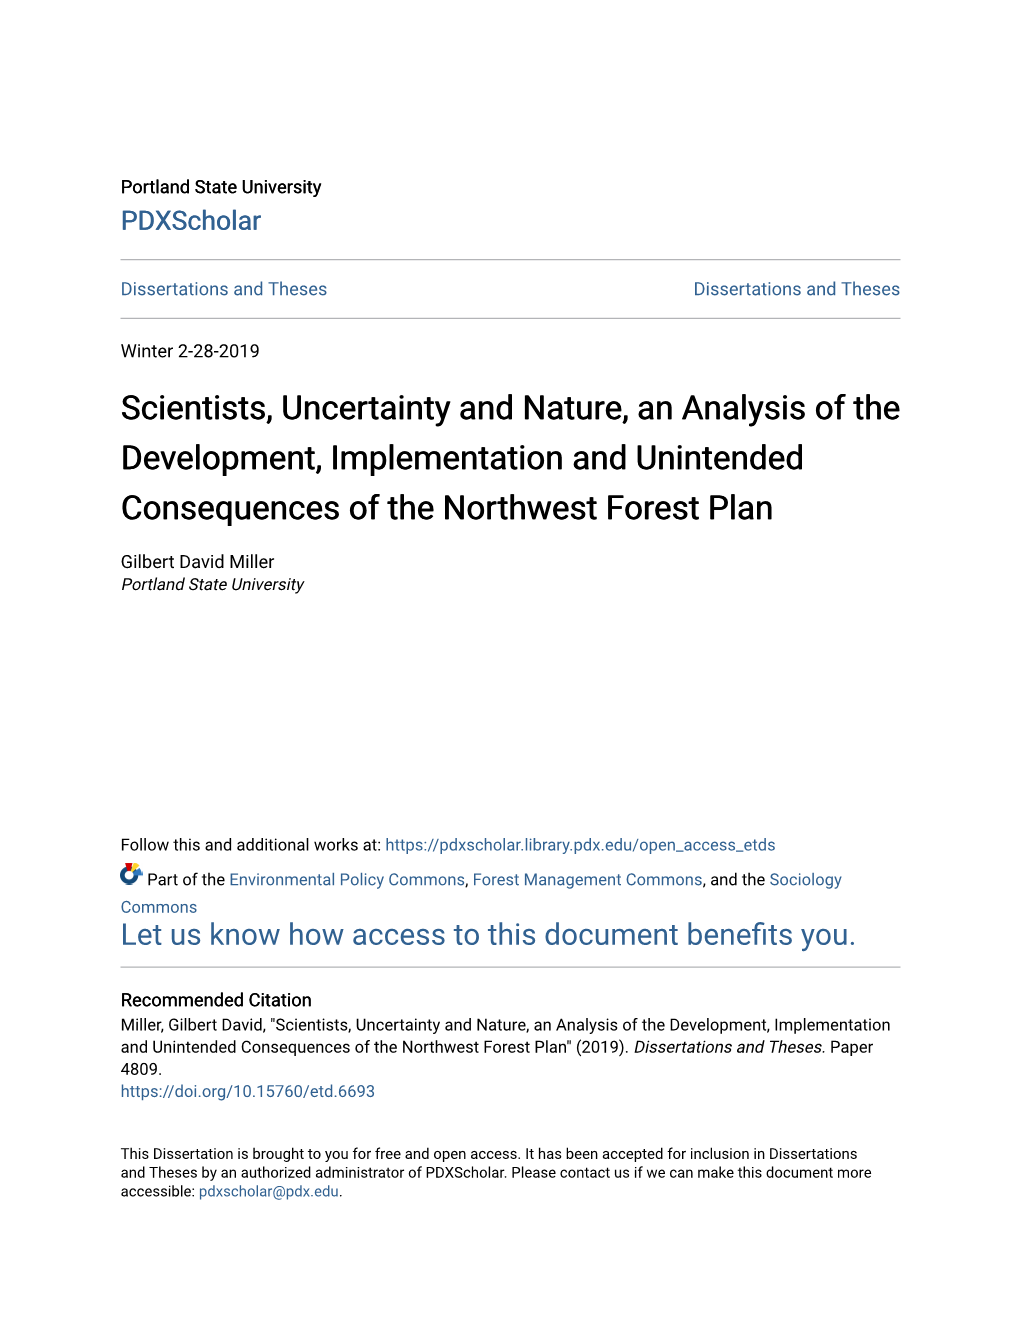 Scientists, Uncertainty and Nature, an Analysis of the Development, Implementation and Unintended Consequences of the Northwest Forest Plan